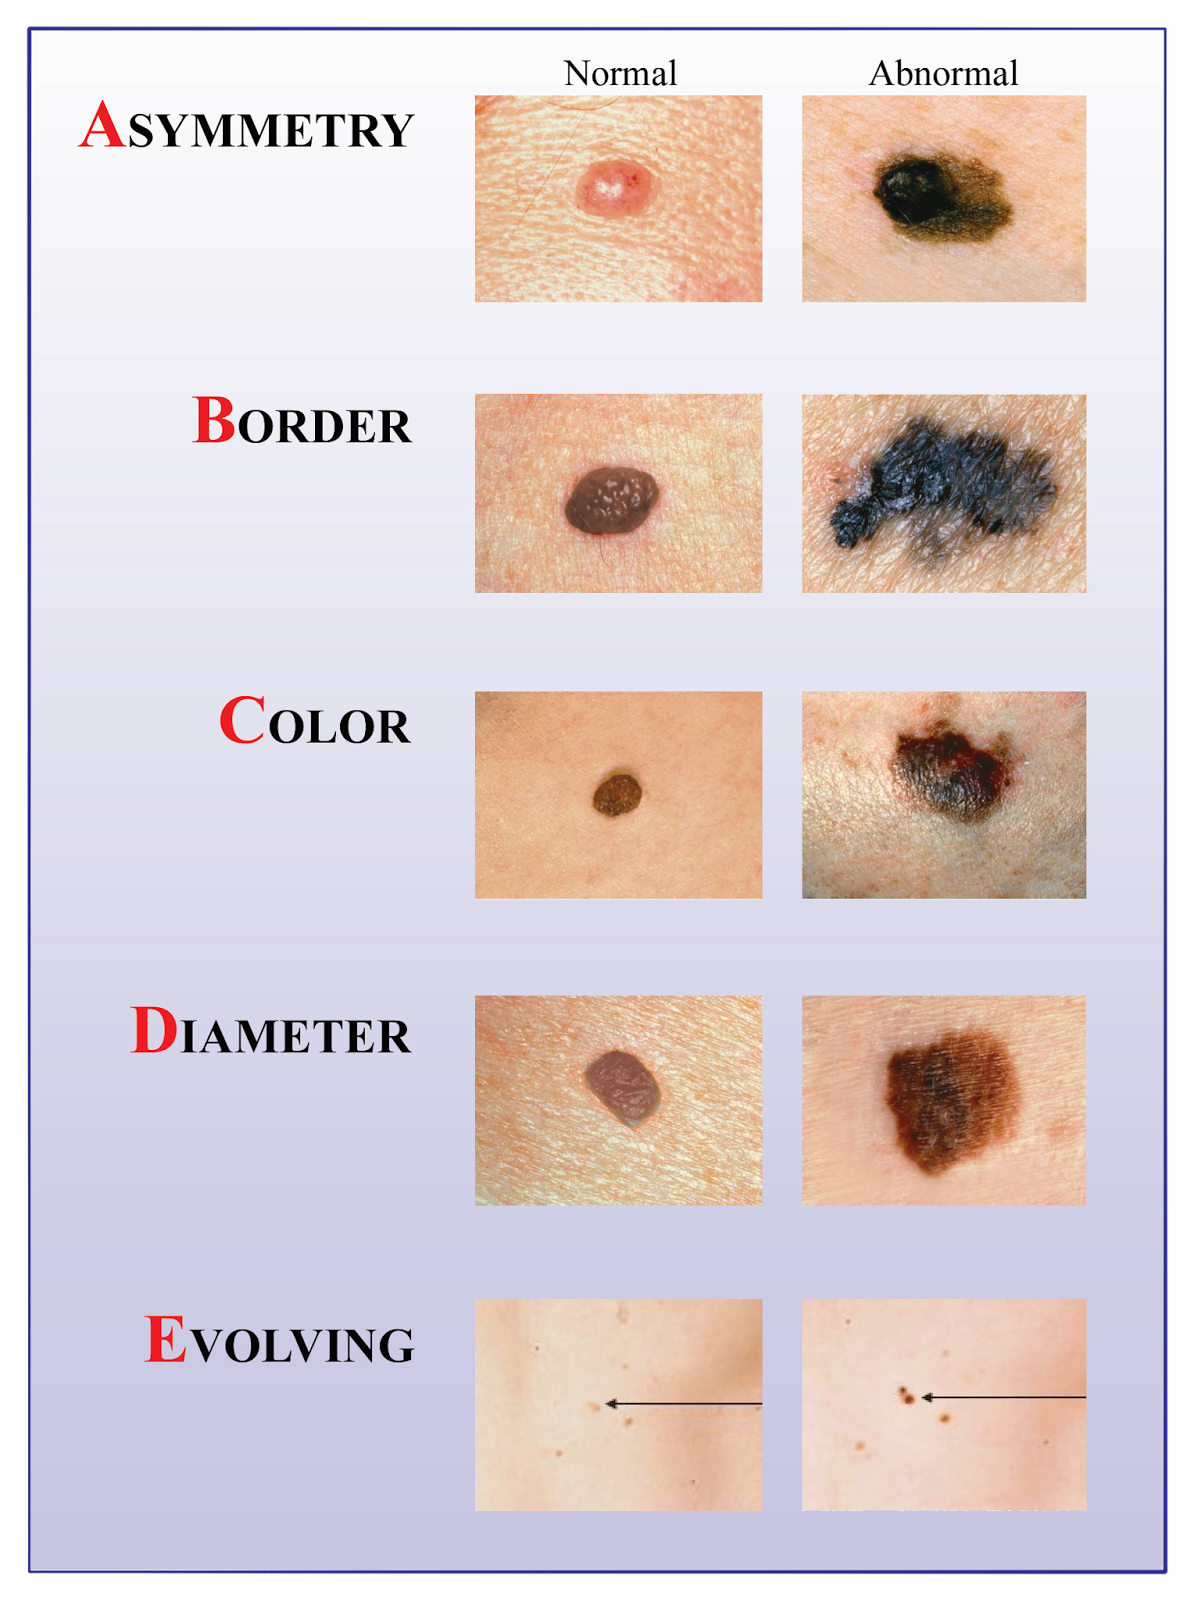 Remember The Abcdes Of Melanoma The Eye Associates